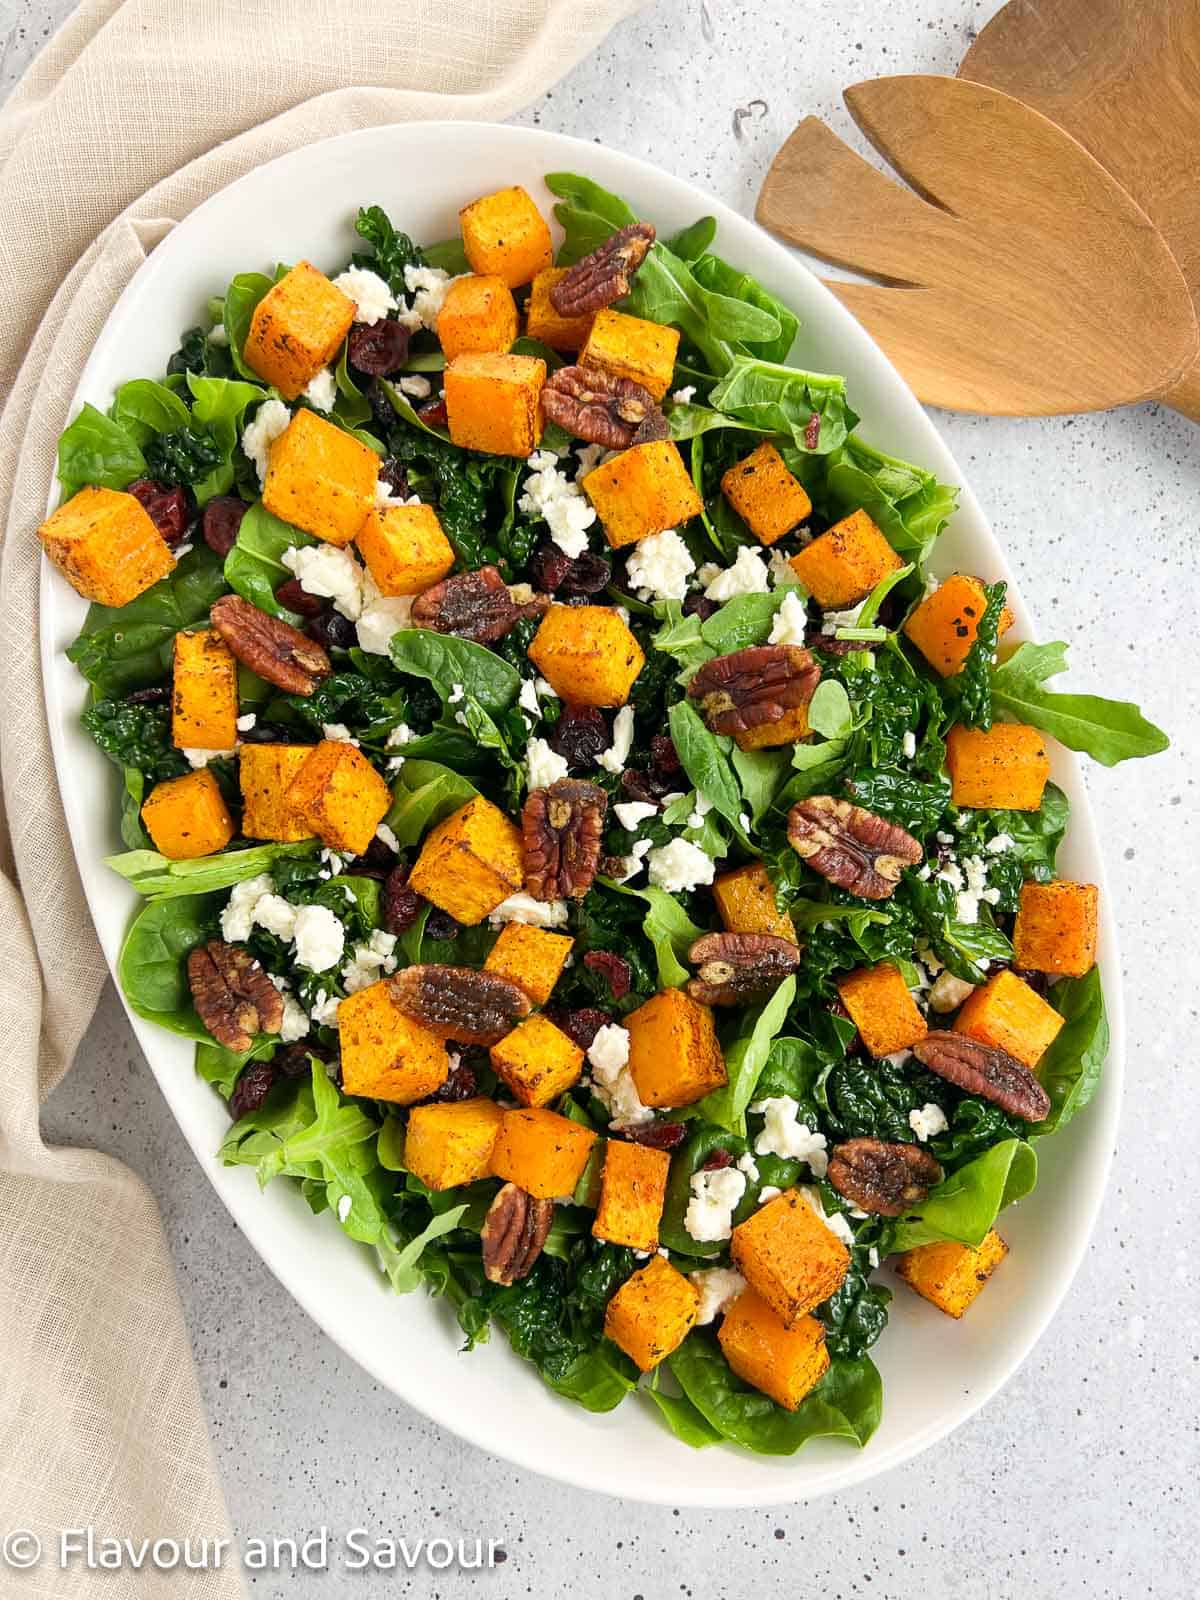 Butternut squash salad with cranberries, toasted pecans, and feta cheese on a bed of mixed greens.